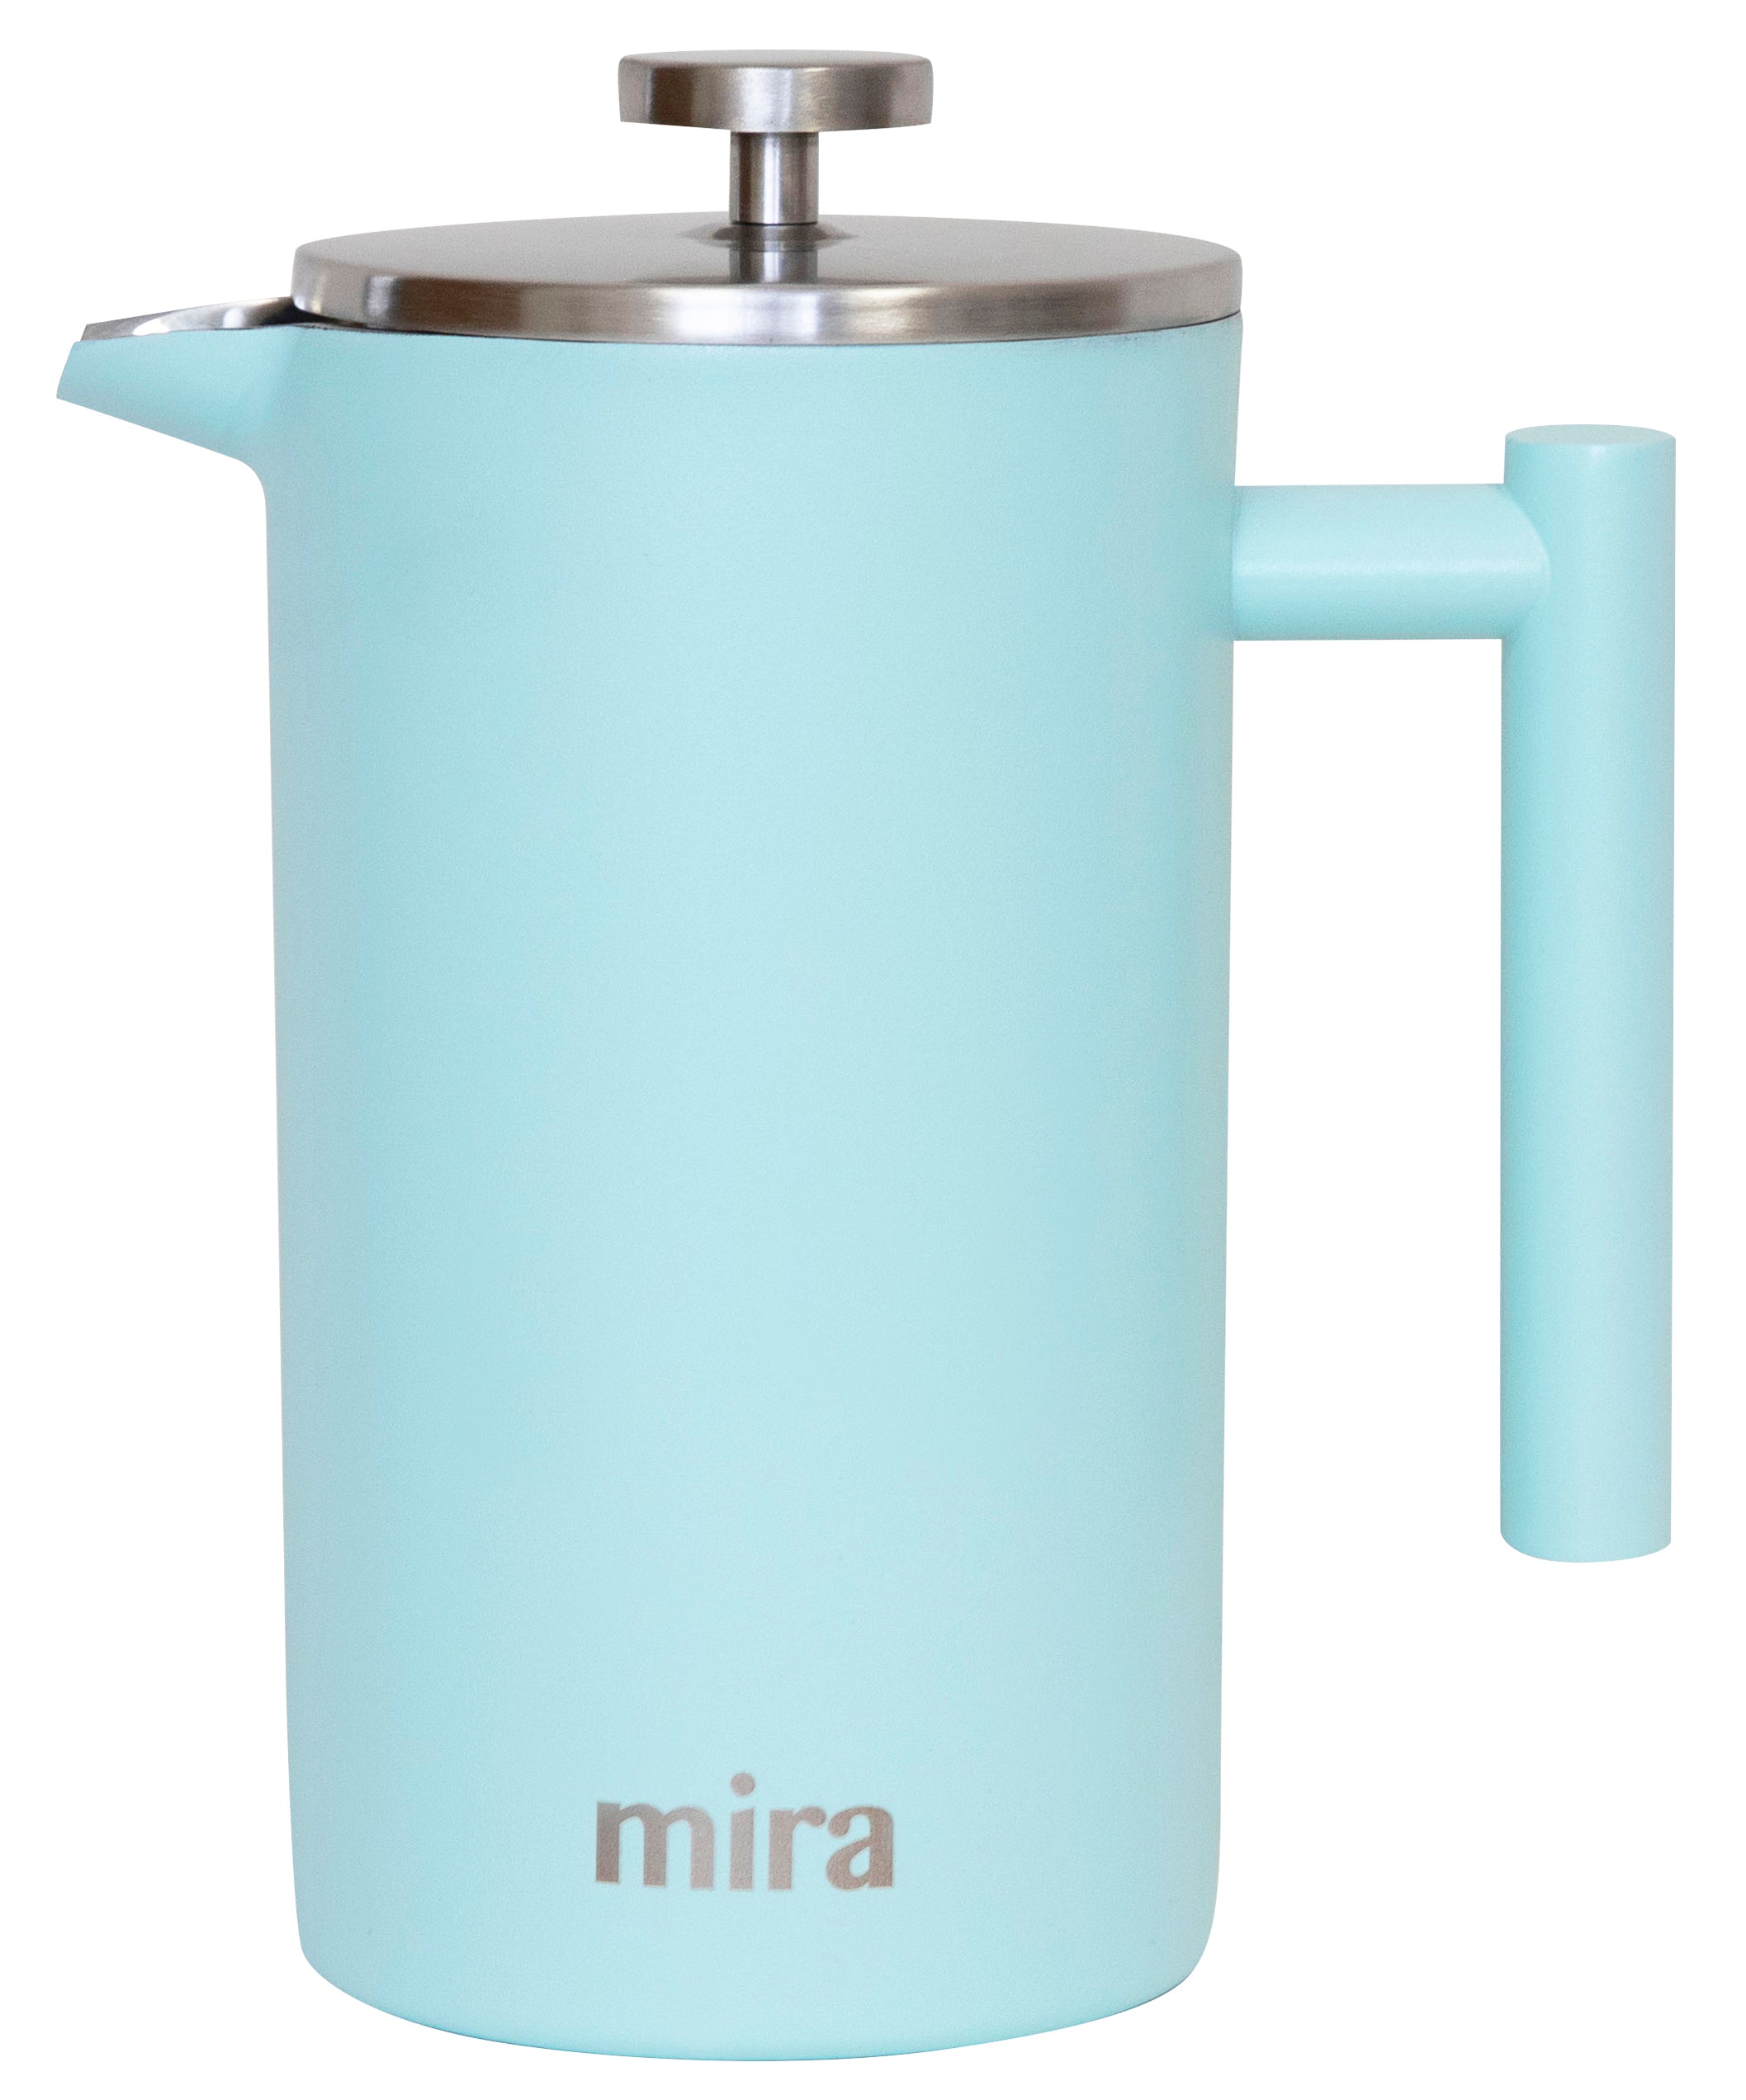 Mira 20oz Stainless Steel French Press